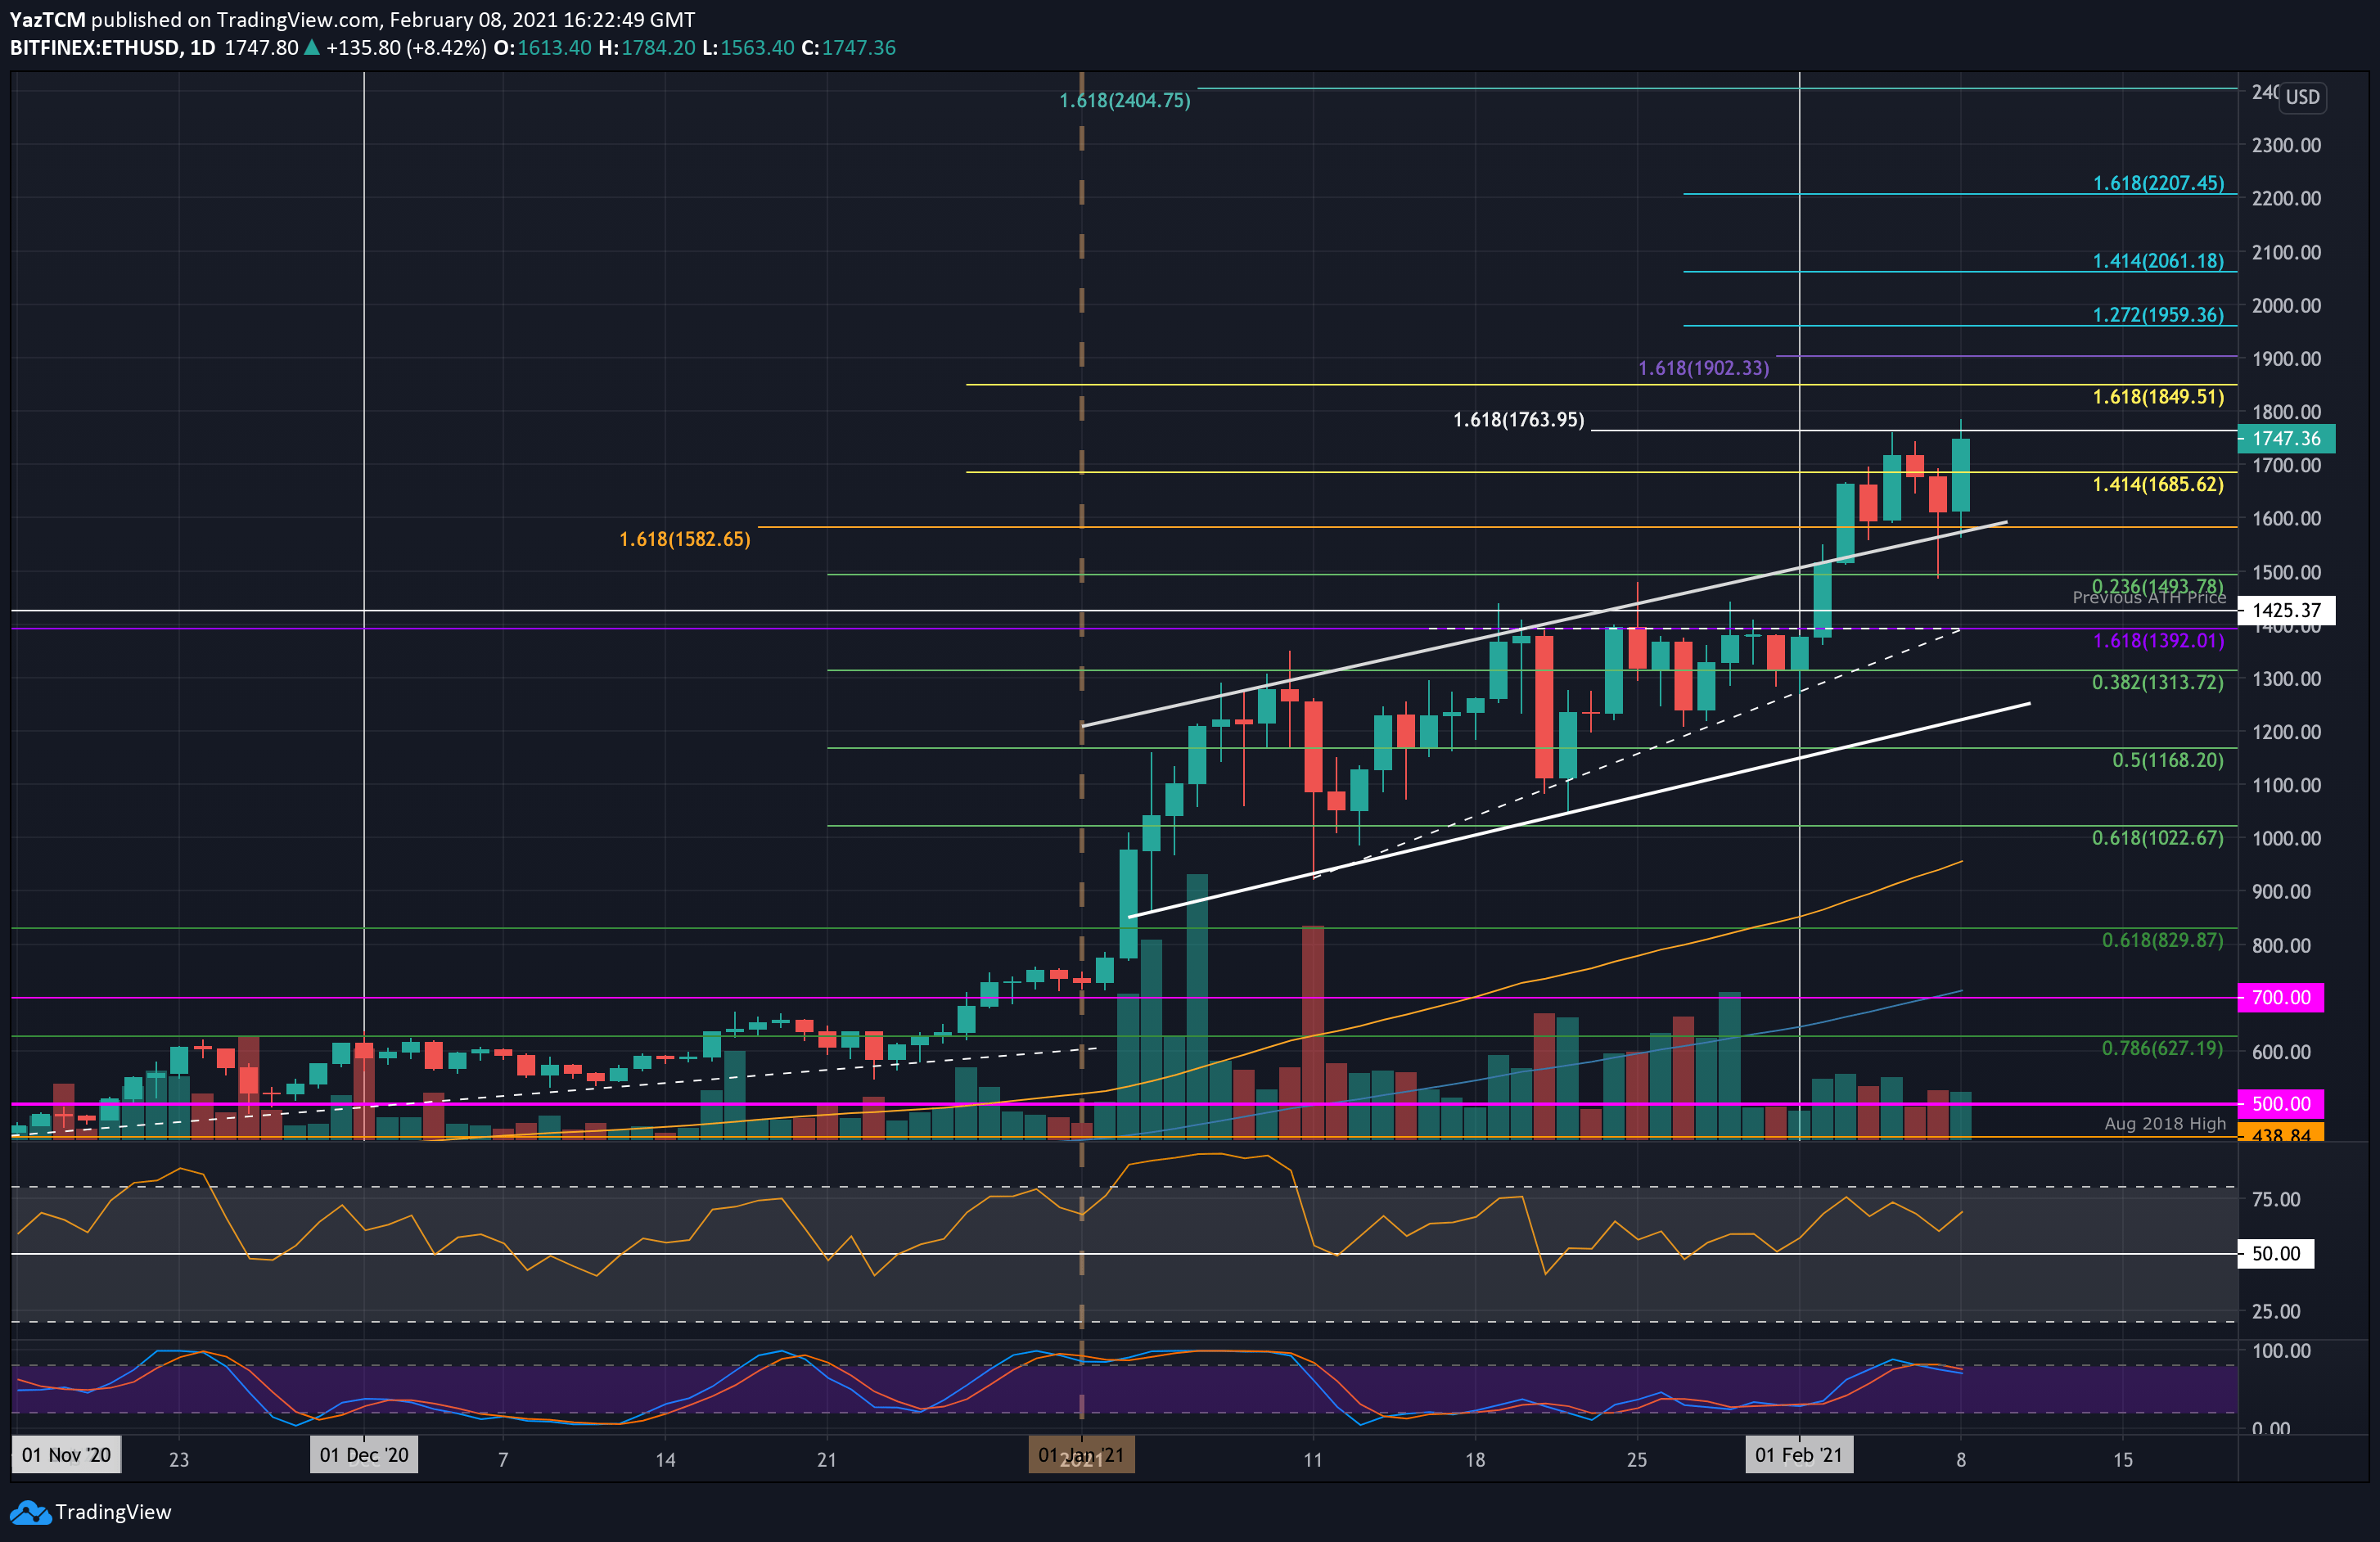 Ethereum Sets New All-Time High, Is $2000 Incoming? (ETH Price Analysis)